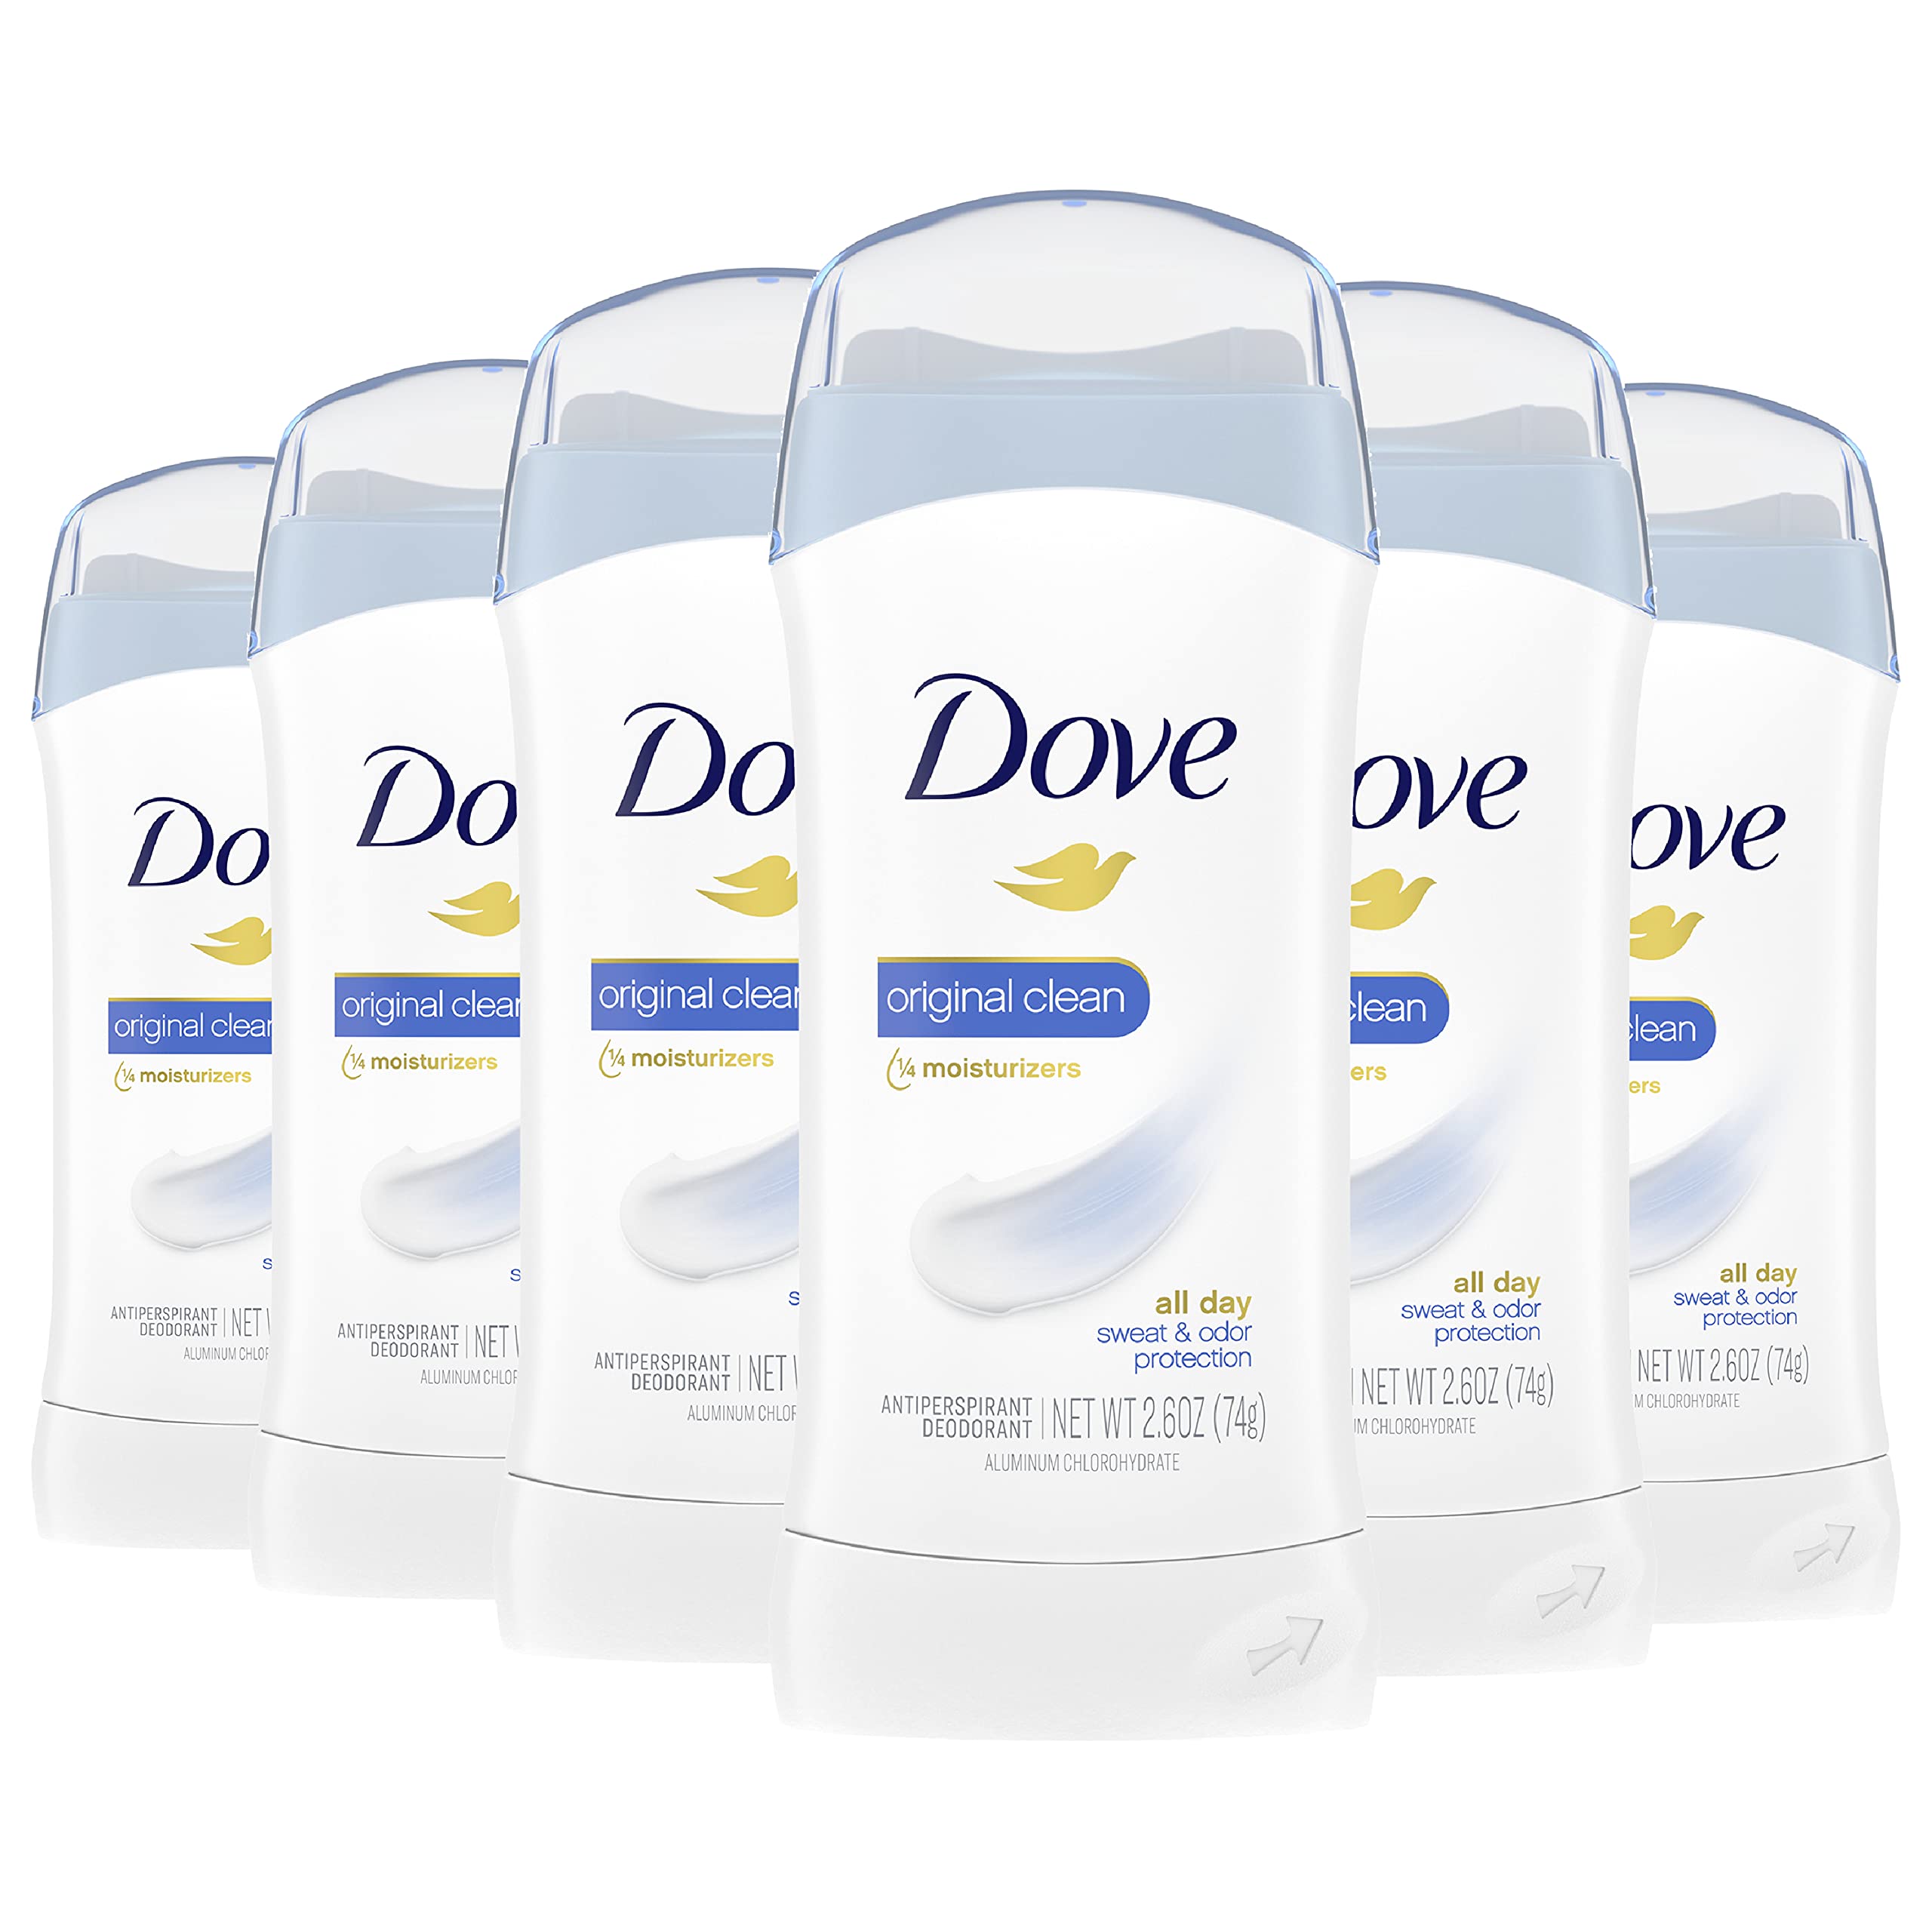 Dove Invisible Solid Antiperspirant Deodorant Stick for Women, Original Clean, For All Day Underarm Sweat and Odor Protection 2.6 Ounce (Pack of 6)